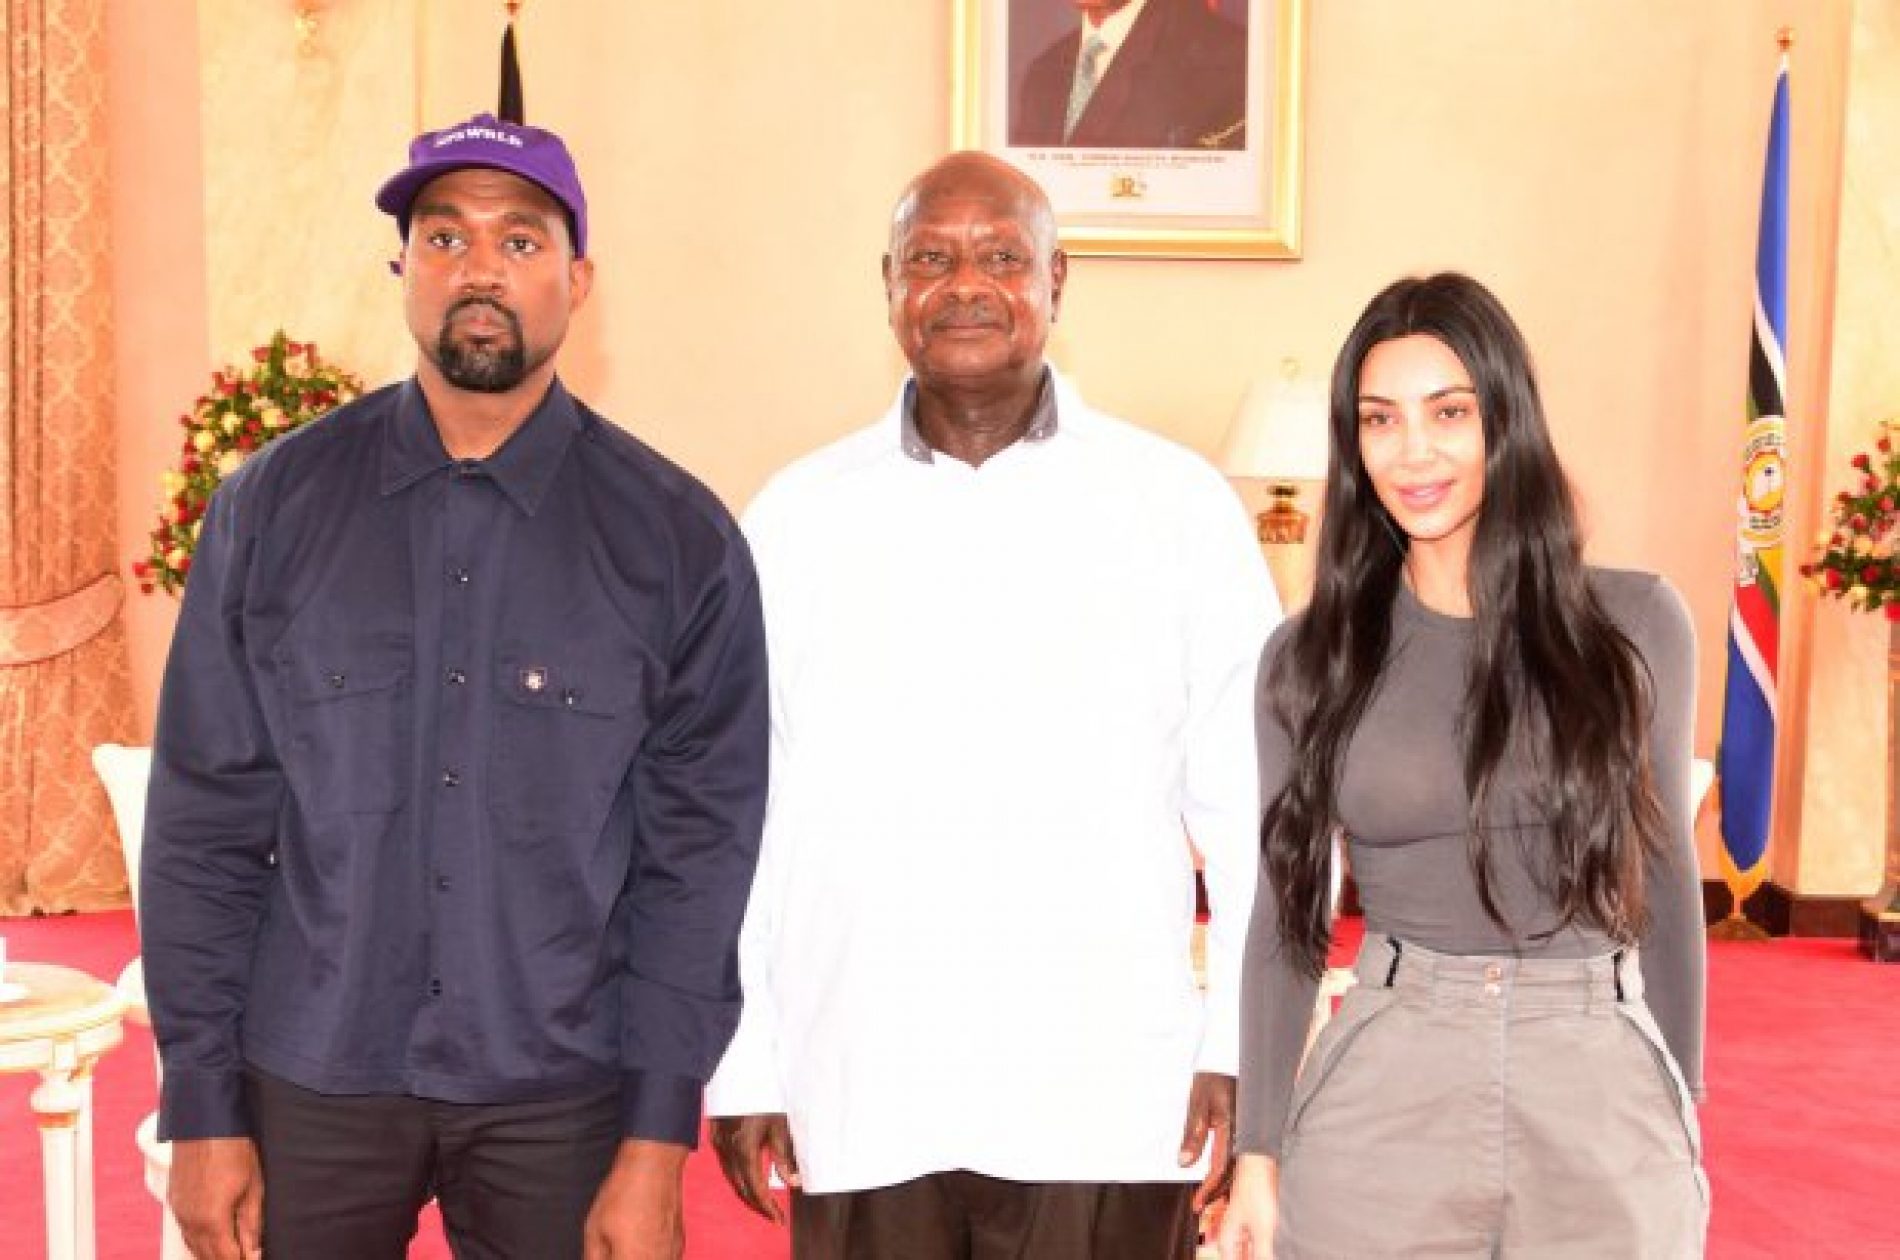 Kanye West and Kim Kardashian are being criticized for meeting with Uganda’s Anti-Gay President